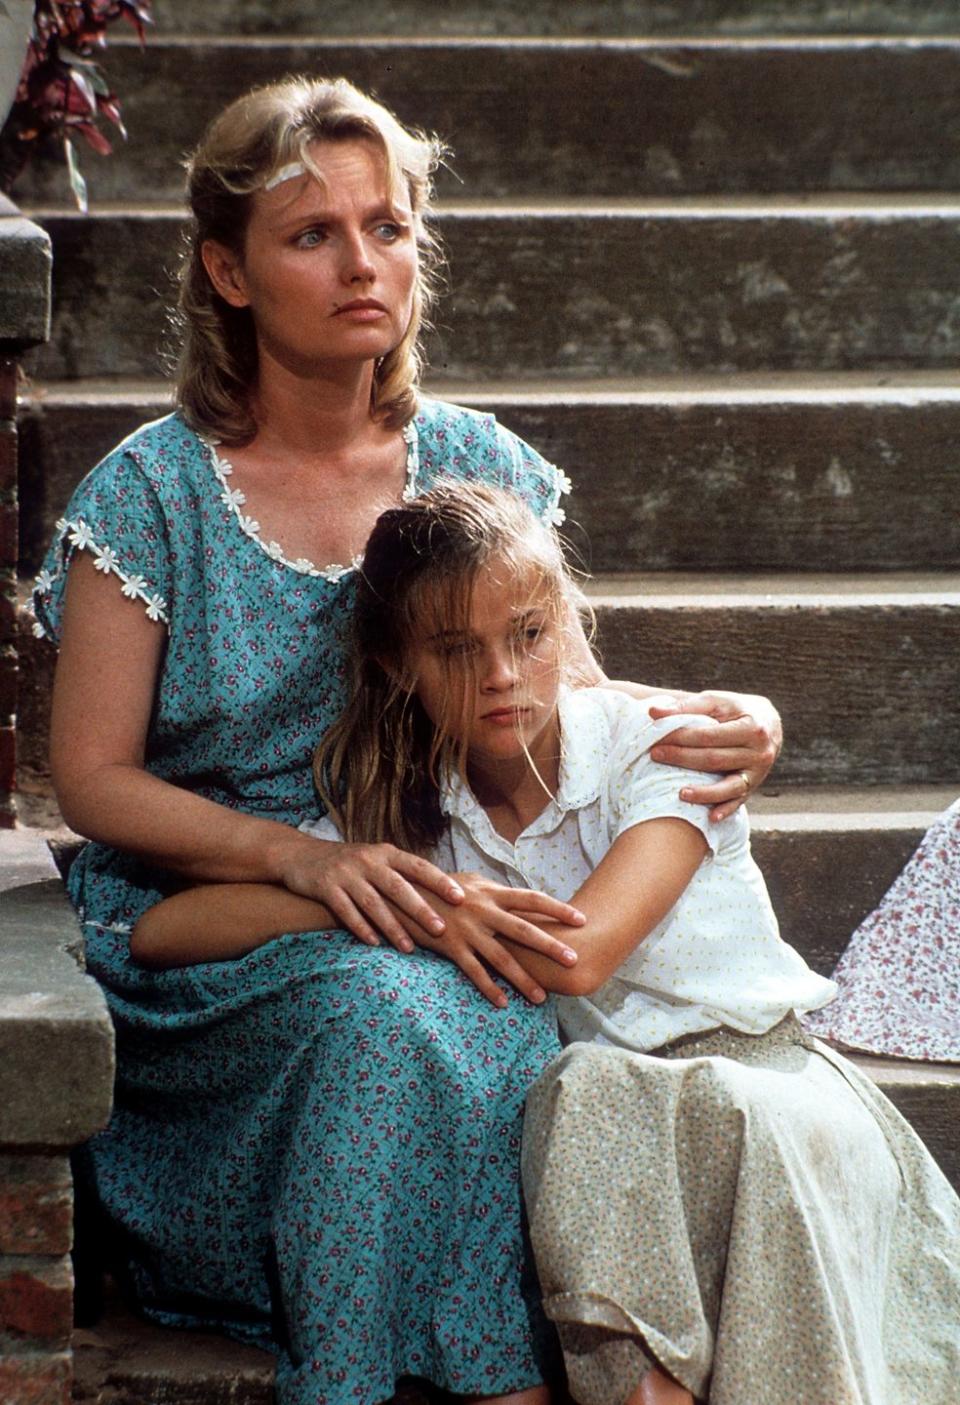 <p>Witherspoon landed her first major role in Robert Mulligan's <em>The Man in the Moon</em>. She played one of the three main characters, alongside Jason London and Emily Warfield, and was just 14 years old when she appeared in the film. </p>